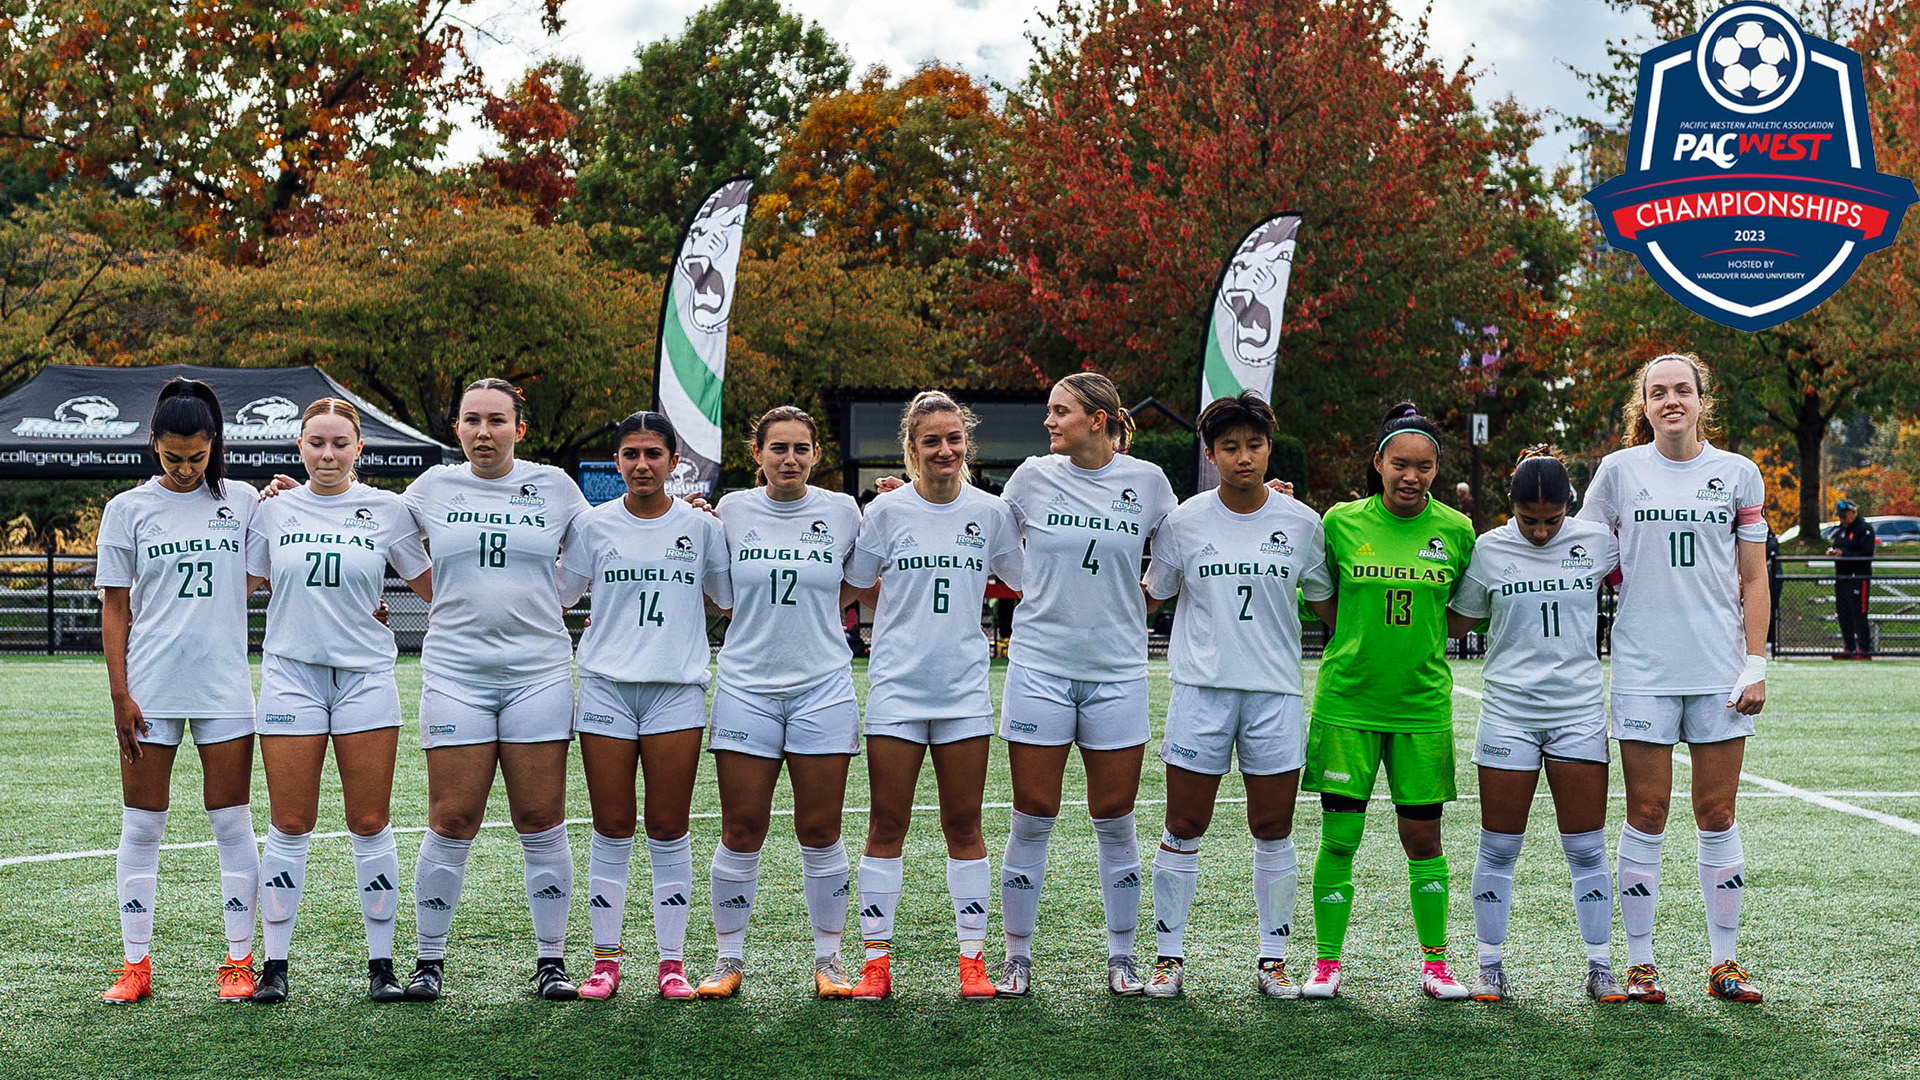 Women's Soccer Look To Book Nationals Ticket at PACWEST Championship